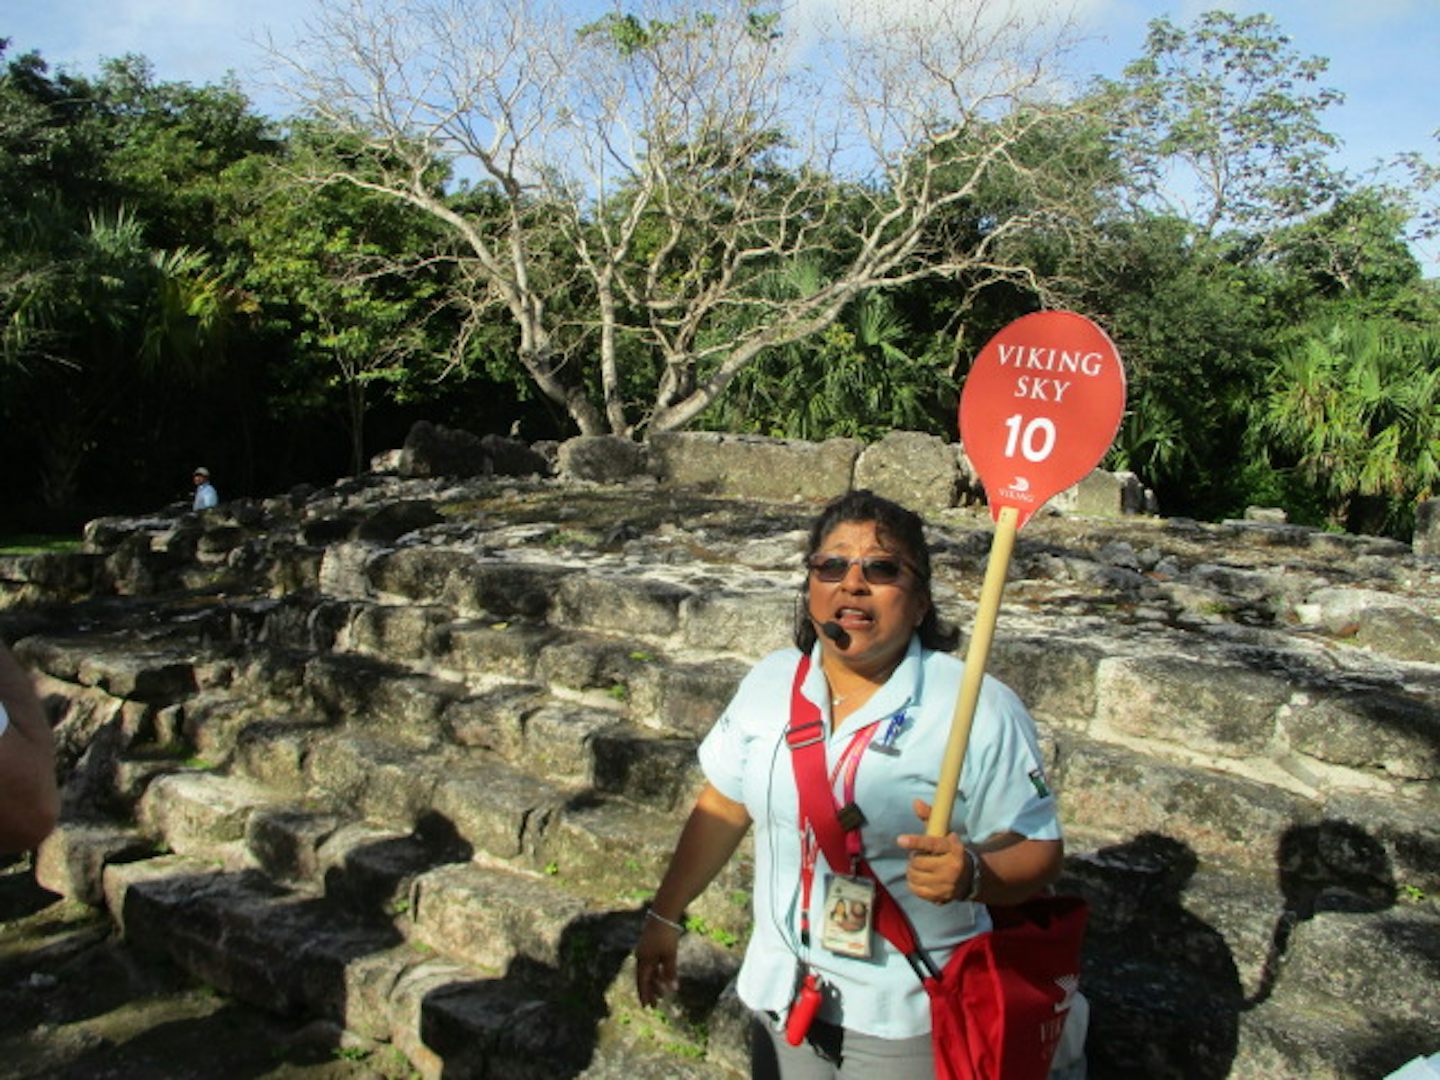 Excellent tour guide Margarita at the Mayan San Gervasio Ruins in Cozumel,